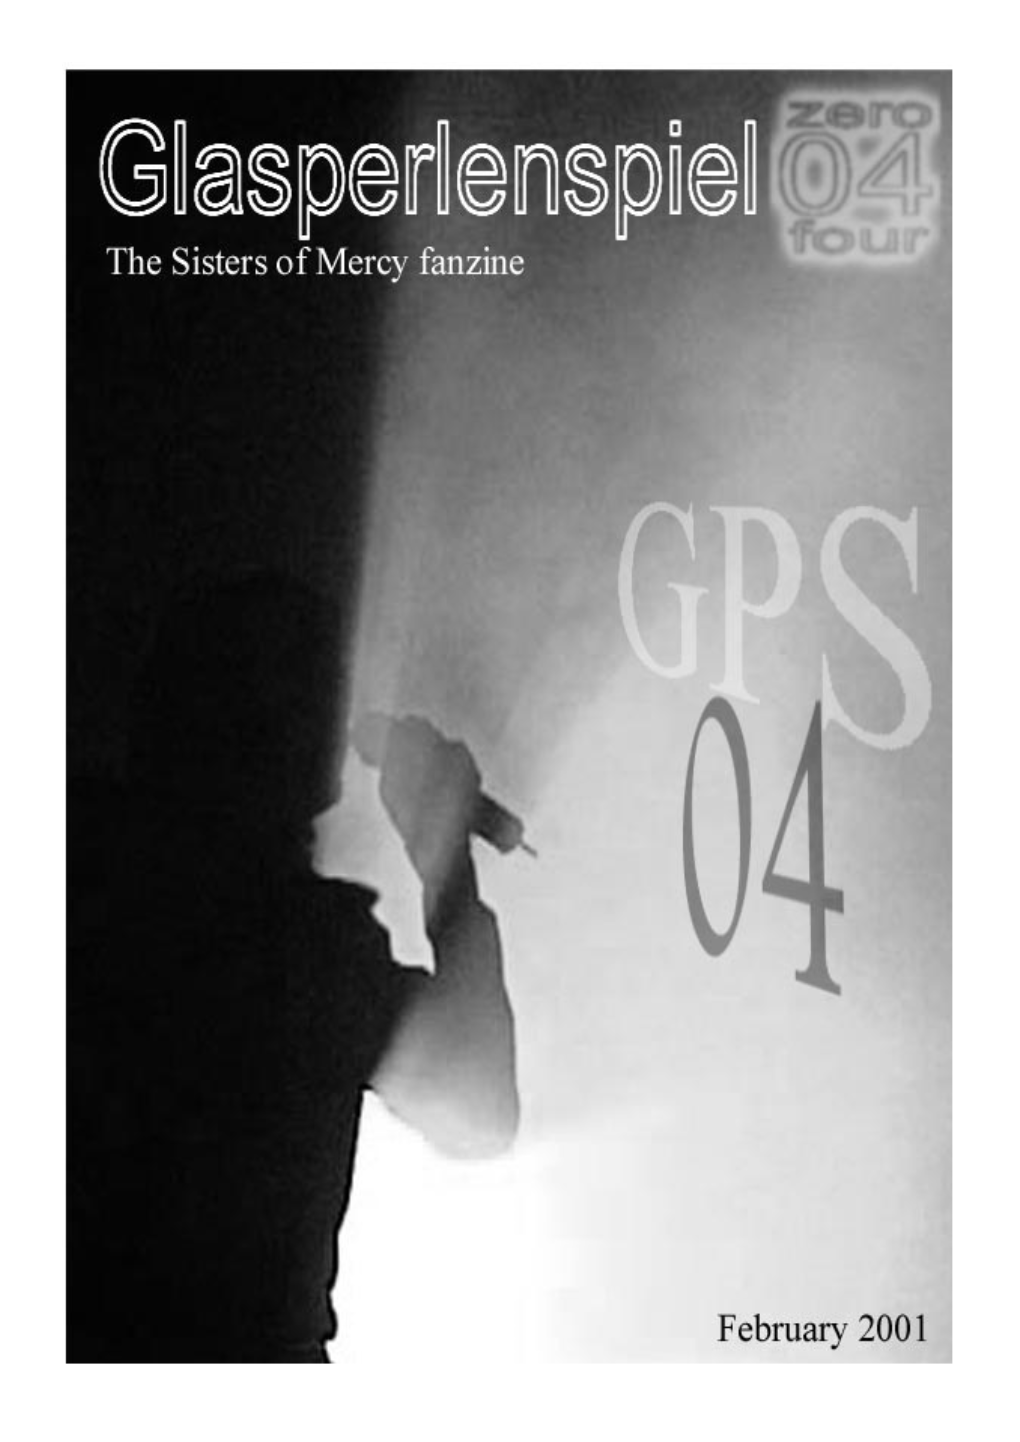 GPS 04 Was Produced By